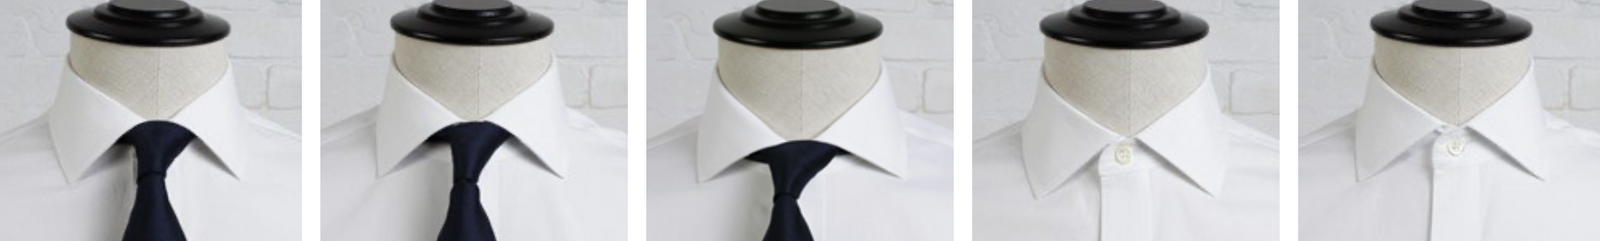 Dress Shirts With Non-Fused Collar and Cuffs